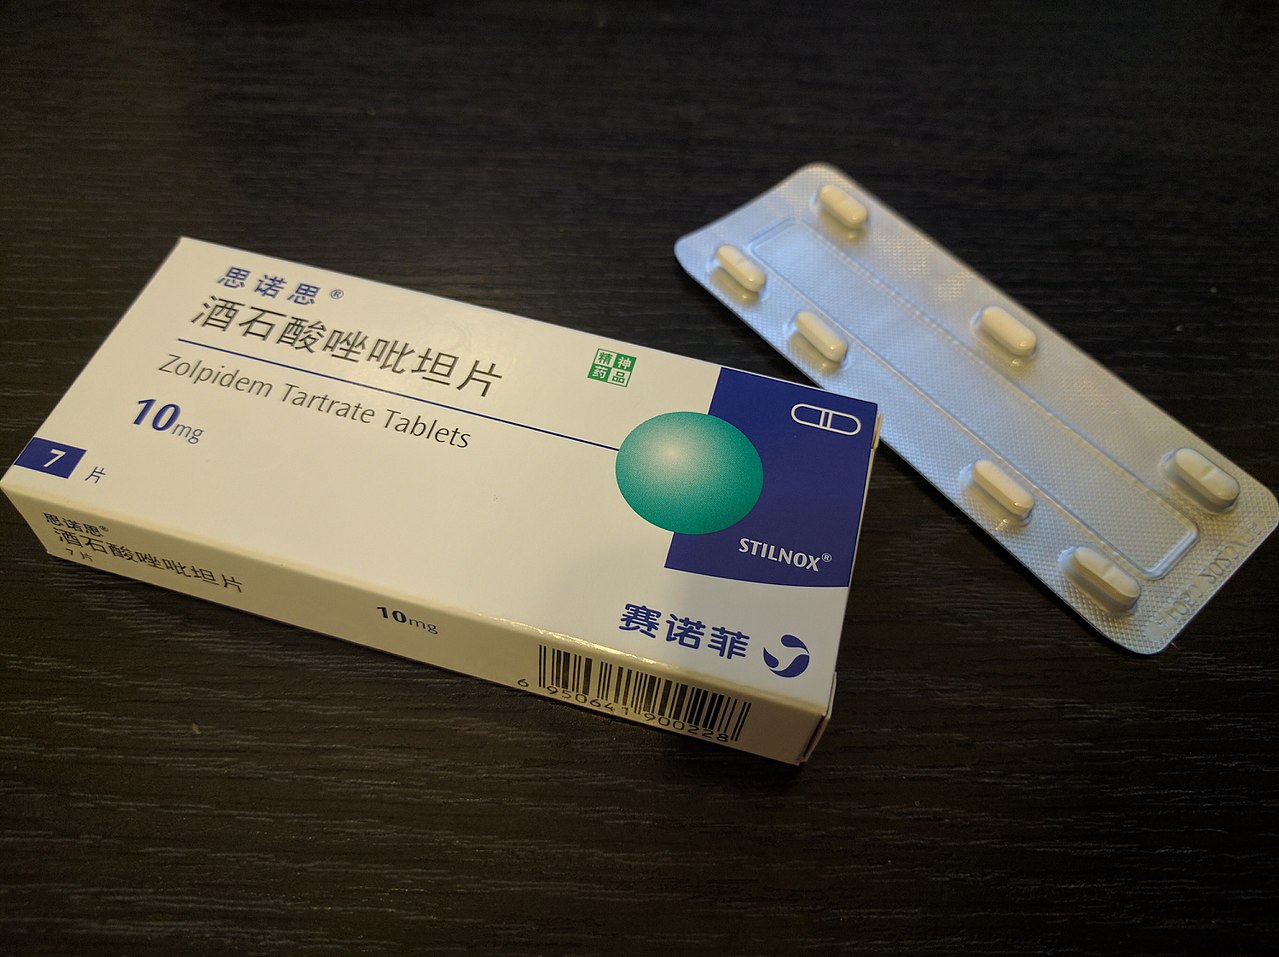 Zolpidem available in china